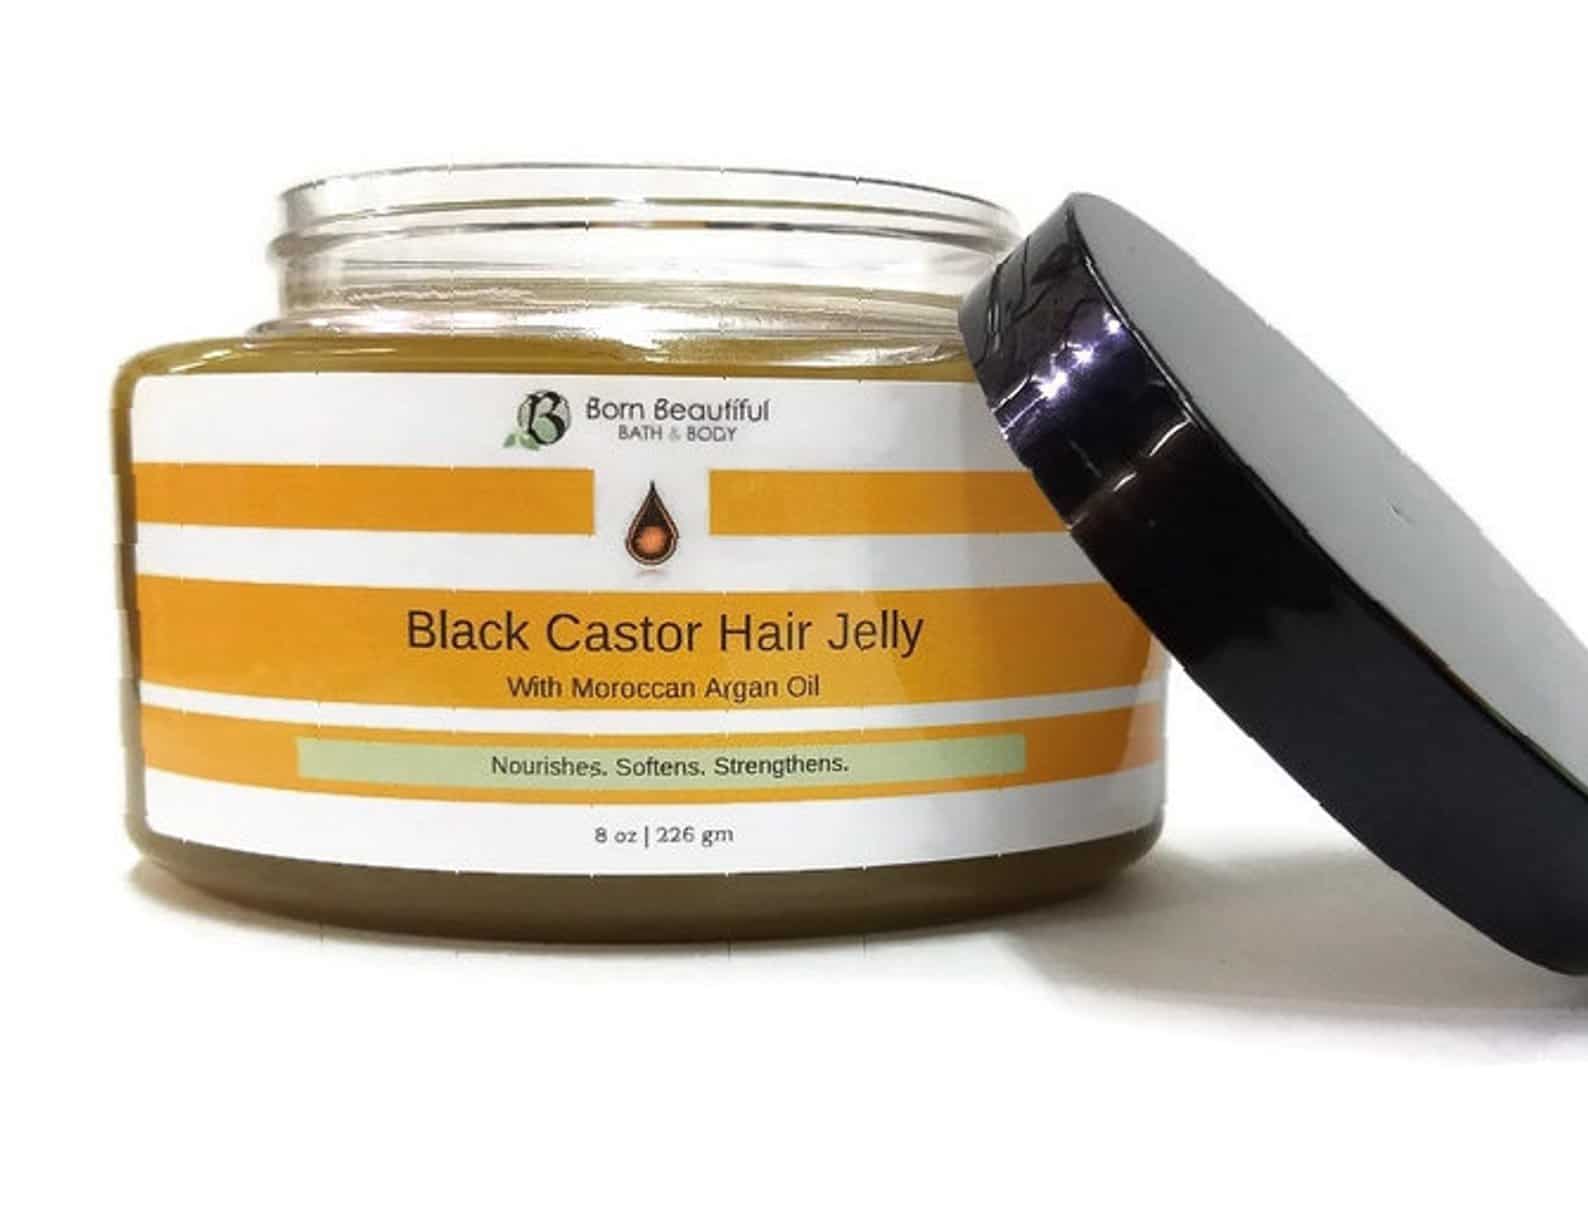 I'm Hoping These 10 Hair Products Created By Black Women Will Revive My Tresses